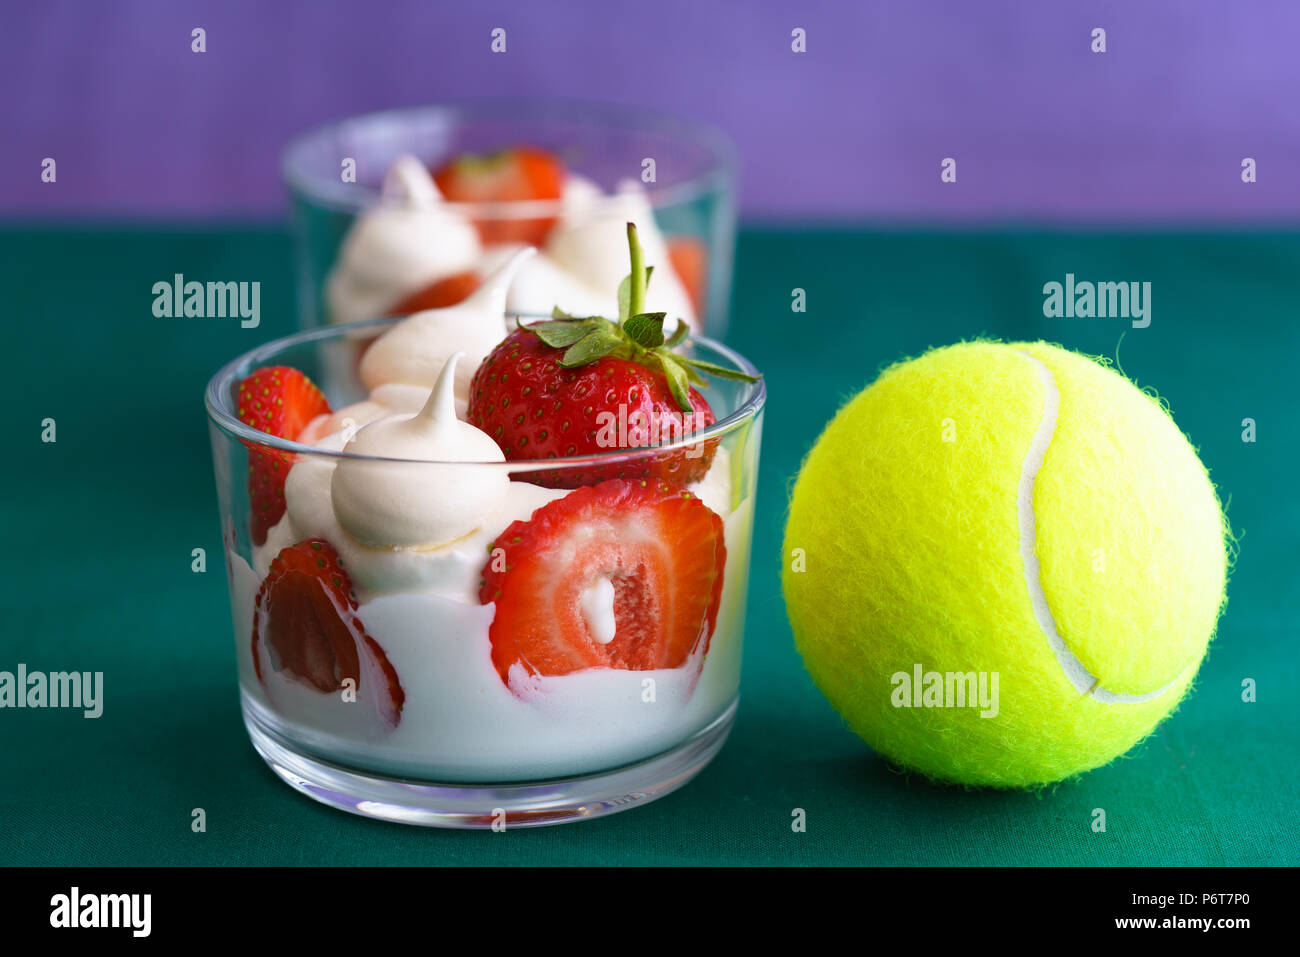 Wimbledon inspired whipped cream, meringues and fresh strawberries in a glass bowl on a green and violet background with a tennis ball Stock Photo